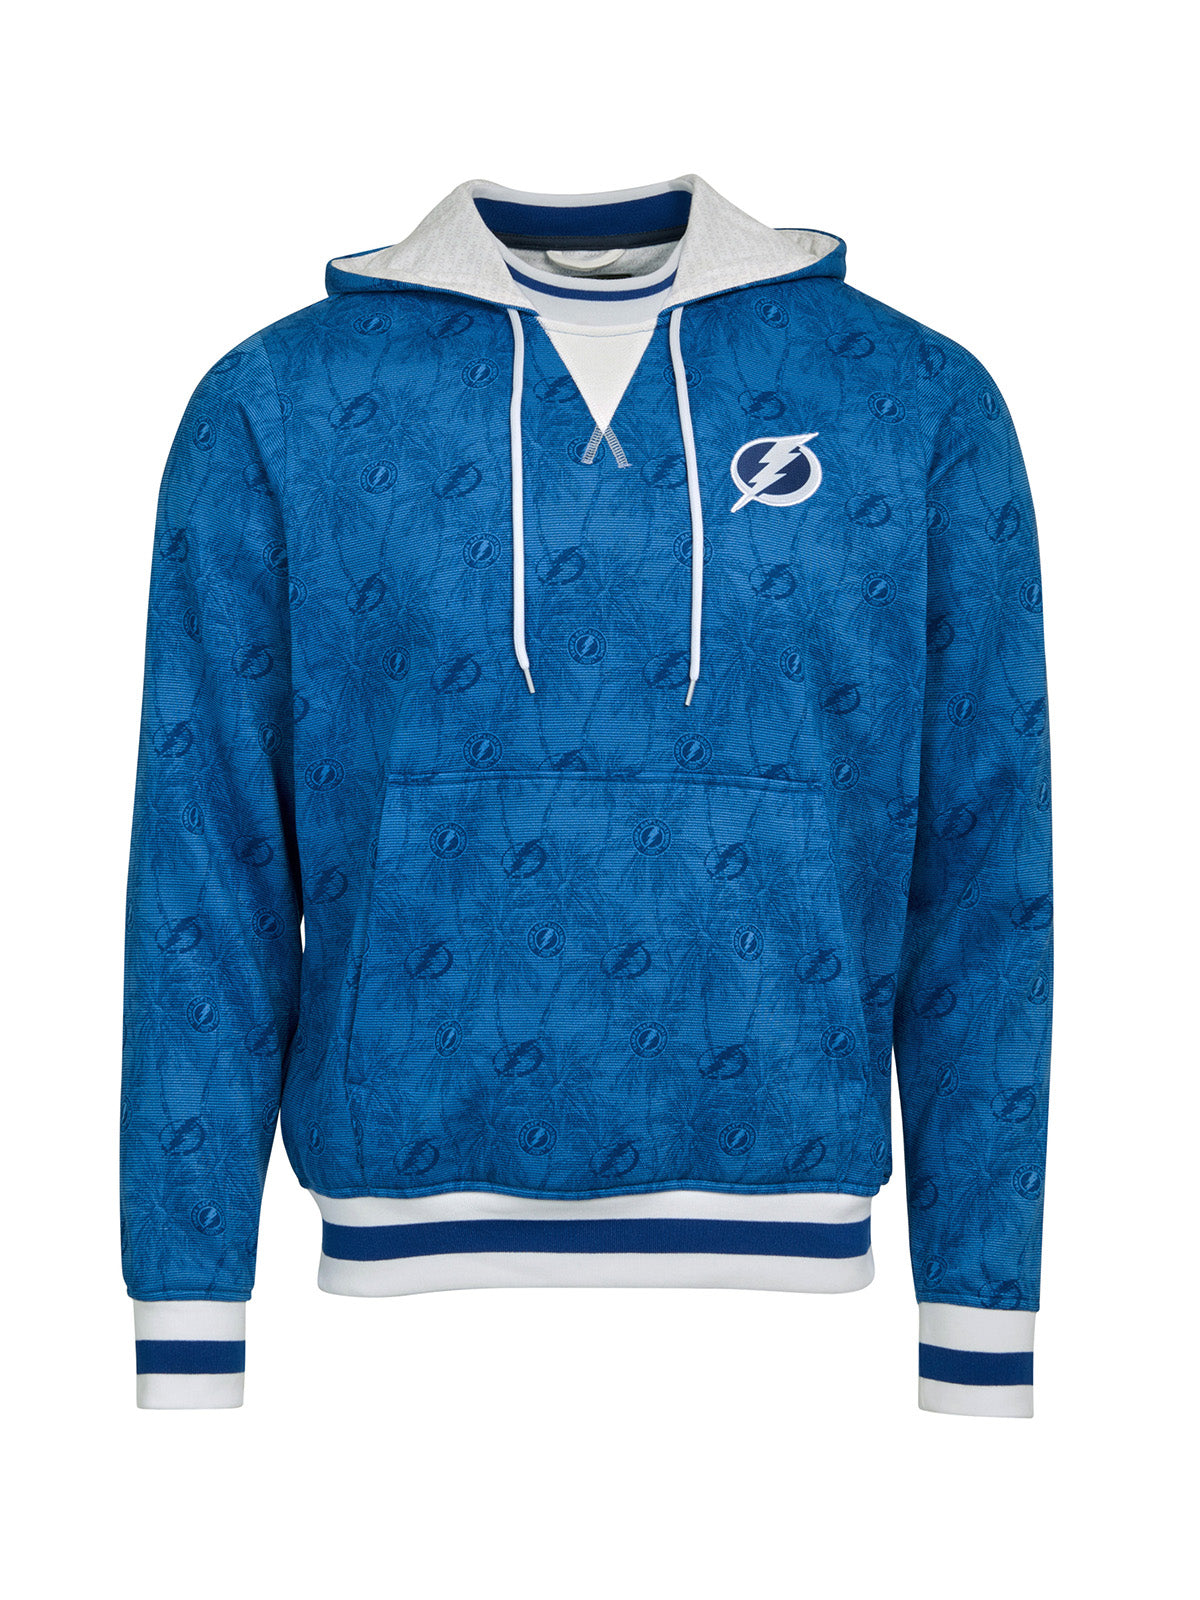 Tampa Bay Lightning Hoodie - Show your team spirit, with the iconic team logo patch on the front left chest, and proudly display your Tampa Bay Lightning support in their team colors with this NHL hockey hoodie.